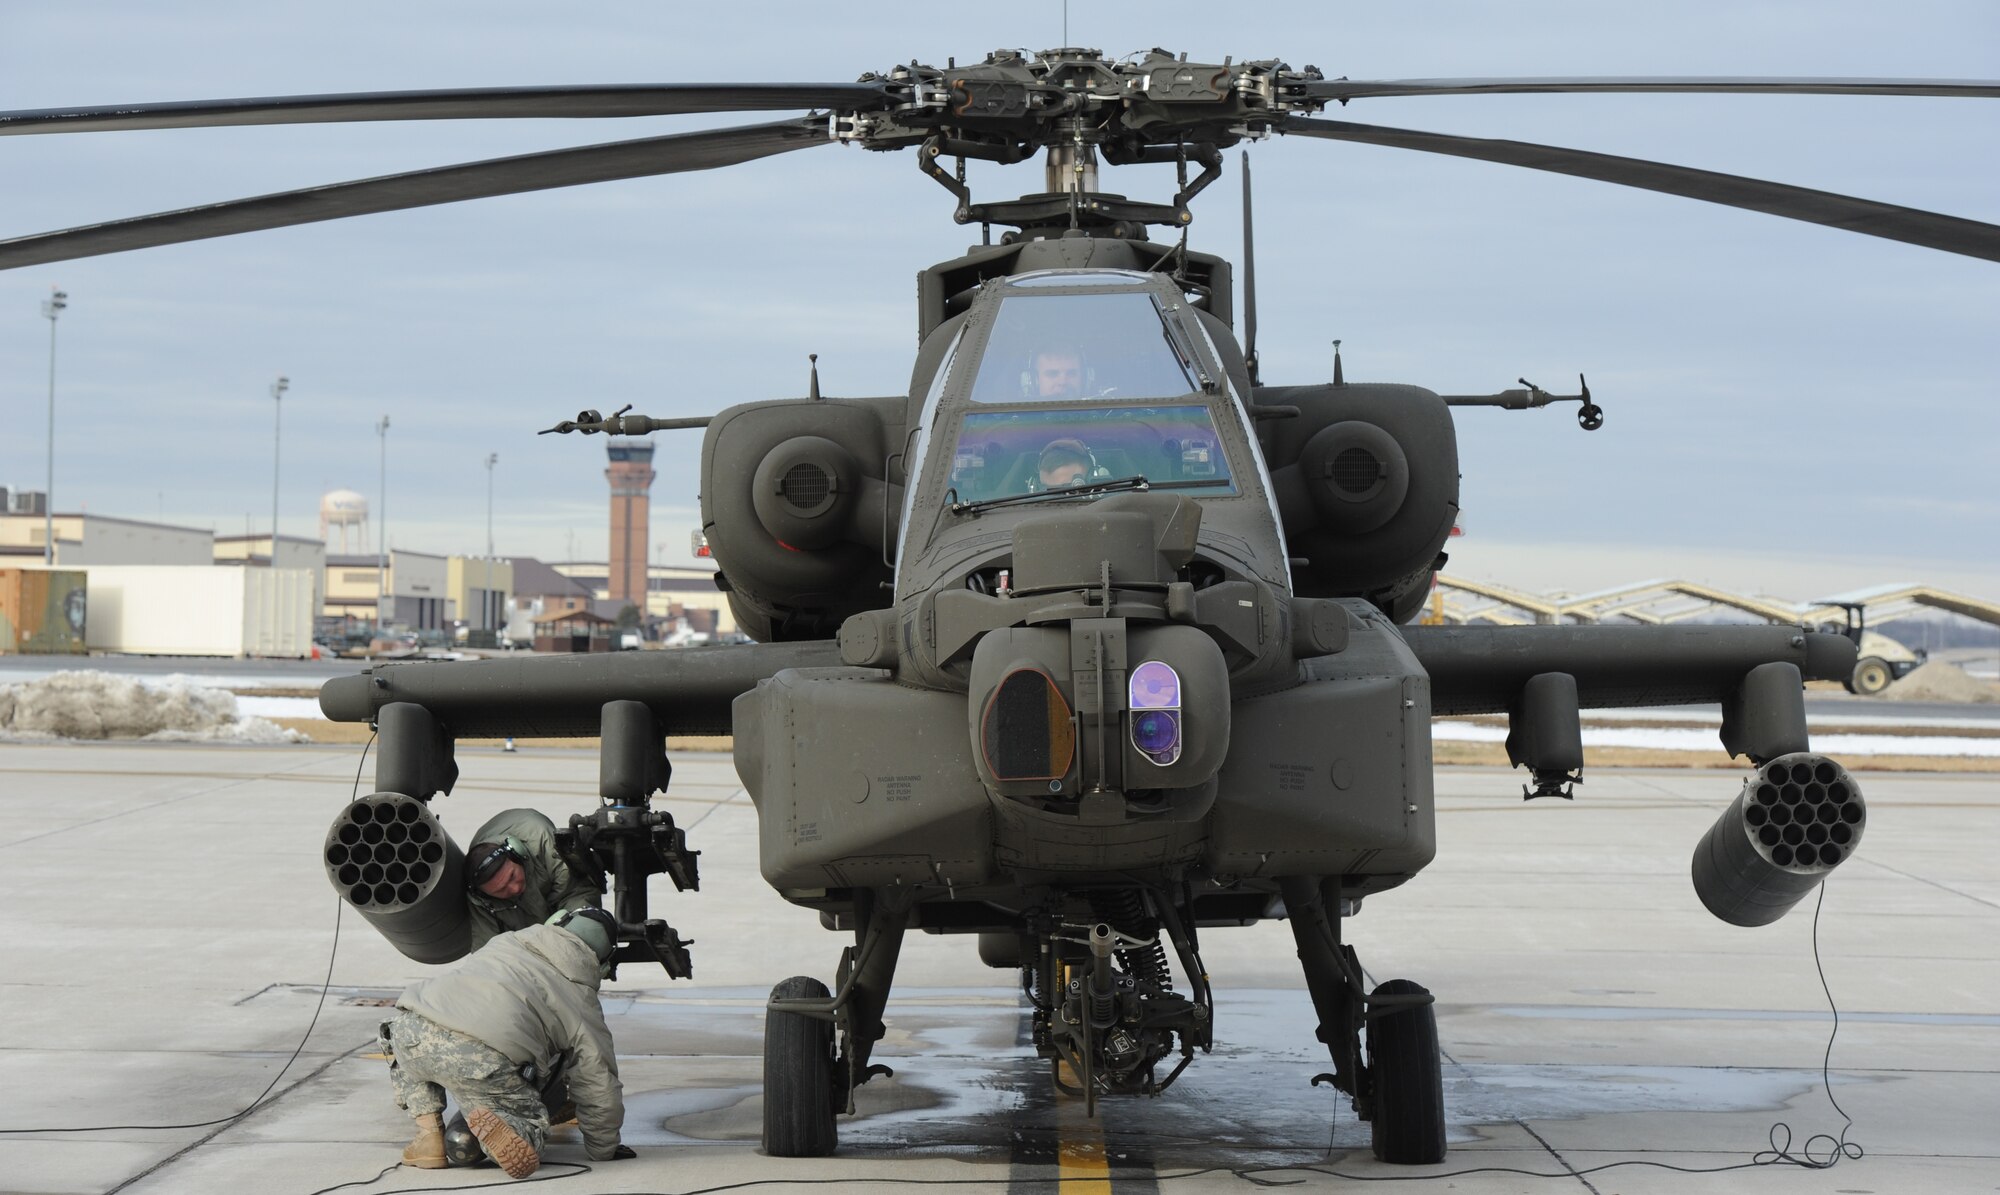 WHITEMAN AIR FORCE BASE, Mo. -- U.S. Army Armament technicians from the 1-135th Attack Reconnaissance Battalion perform daily inspections on an AH 64D Apache Longbow,  Jan. 16. The Apache is a four-blade, twin-engine attack helicopter with a tail wheel-type landing gear arrangement and a cockpit for a crew of two. (U.S. Air Force photo/Staff Sgt. Nick Wilson) (Released)